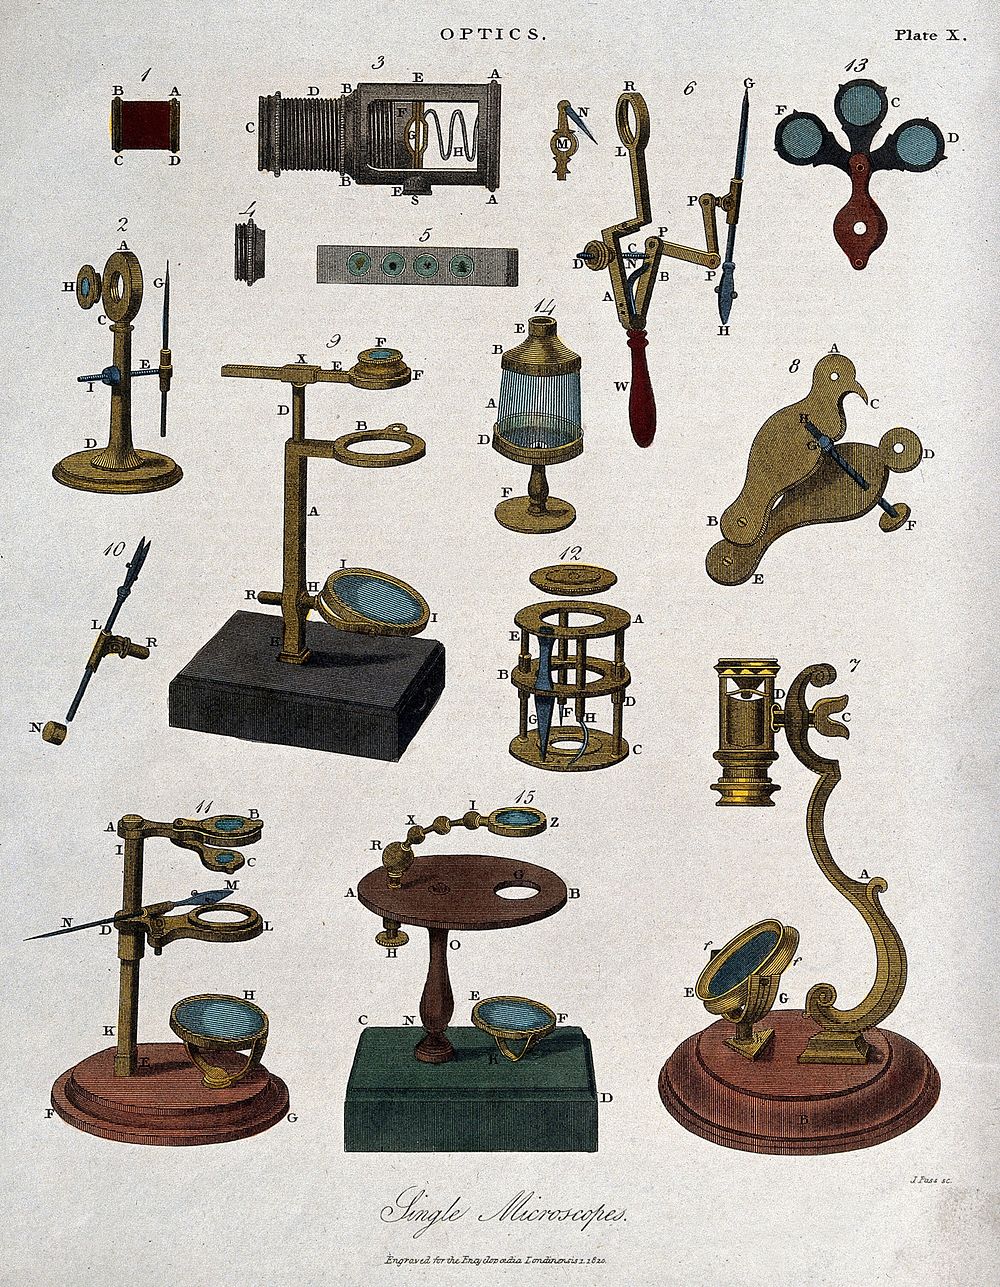 Optics: a simple microscope. Coloured engraving by J. Pass, 1820.